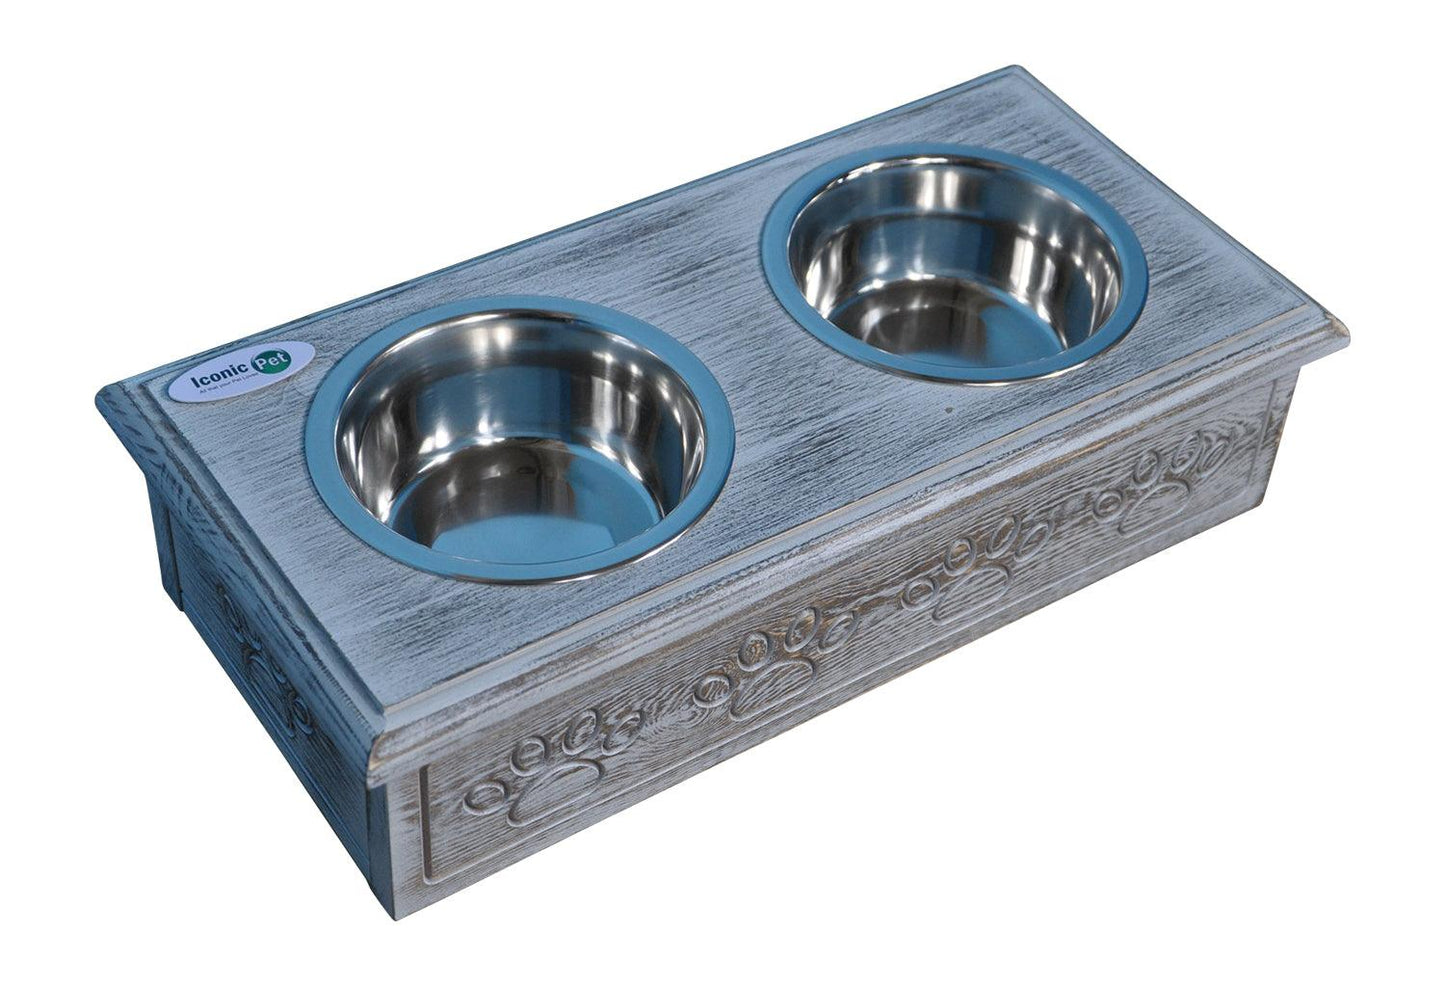 Sassy Paws Wooden Pet Double Diner with Stainless Steel Bowls - Small